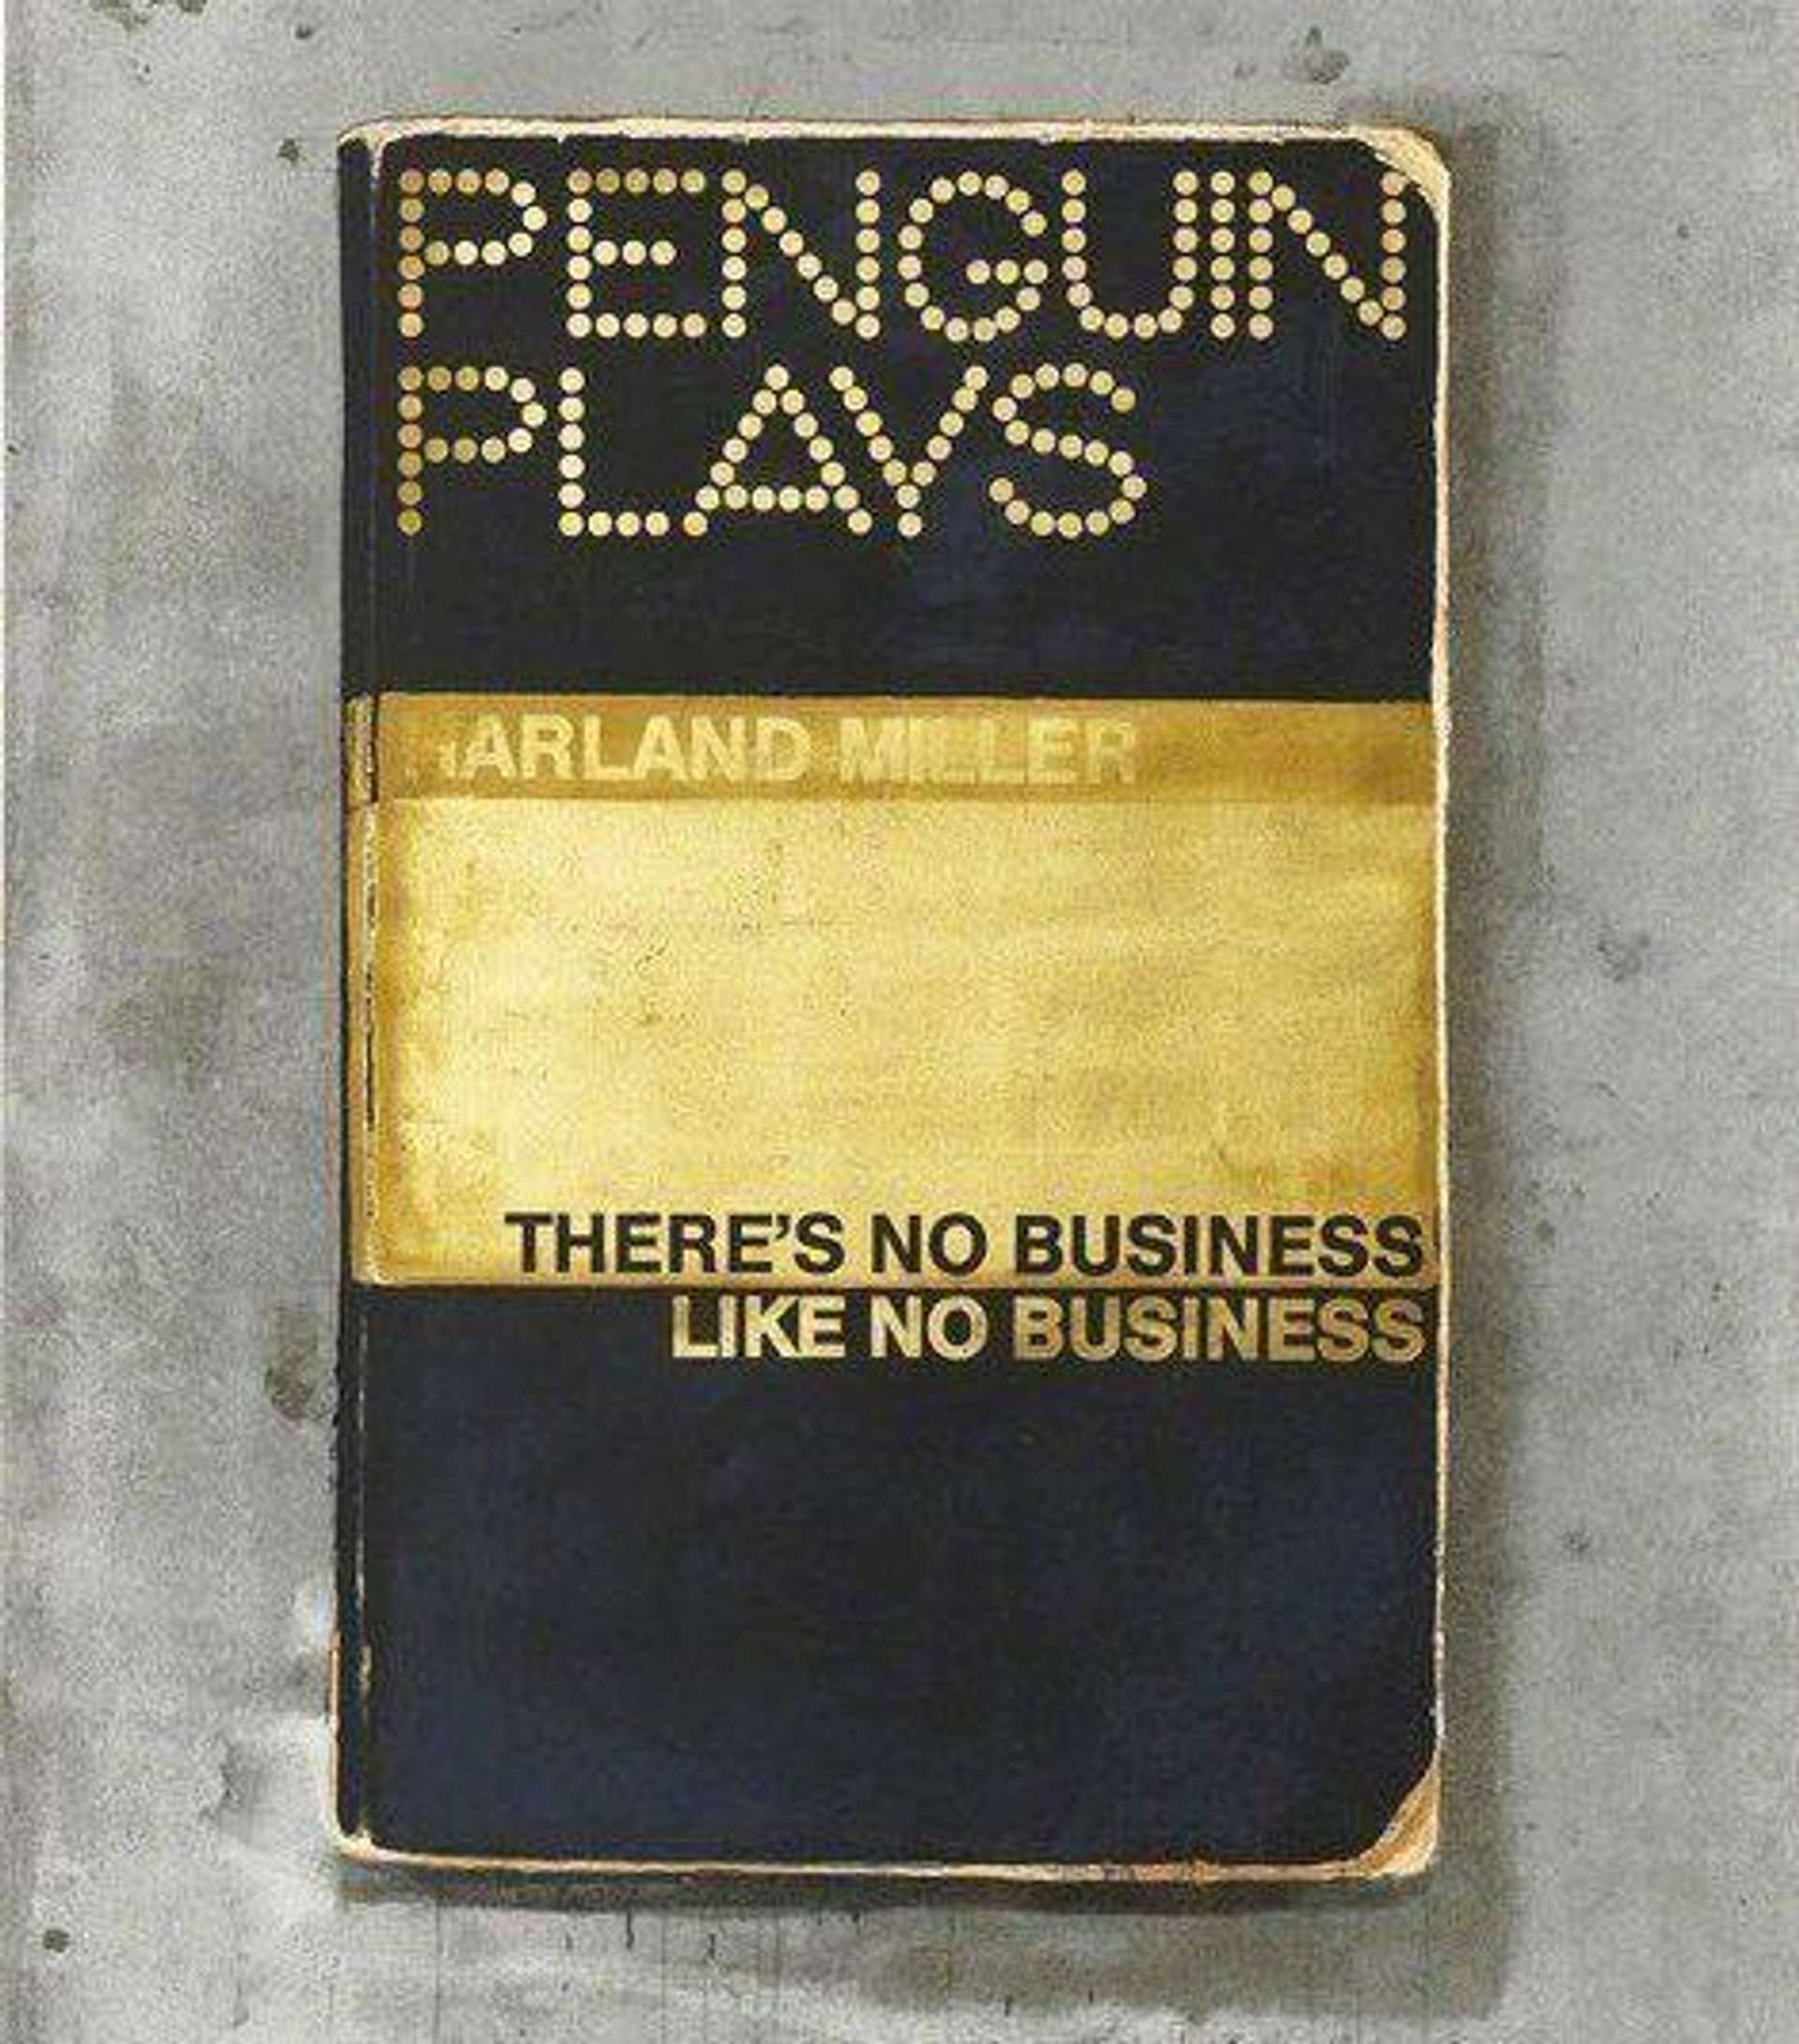 There's No Business Like No Business by Harland Miller